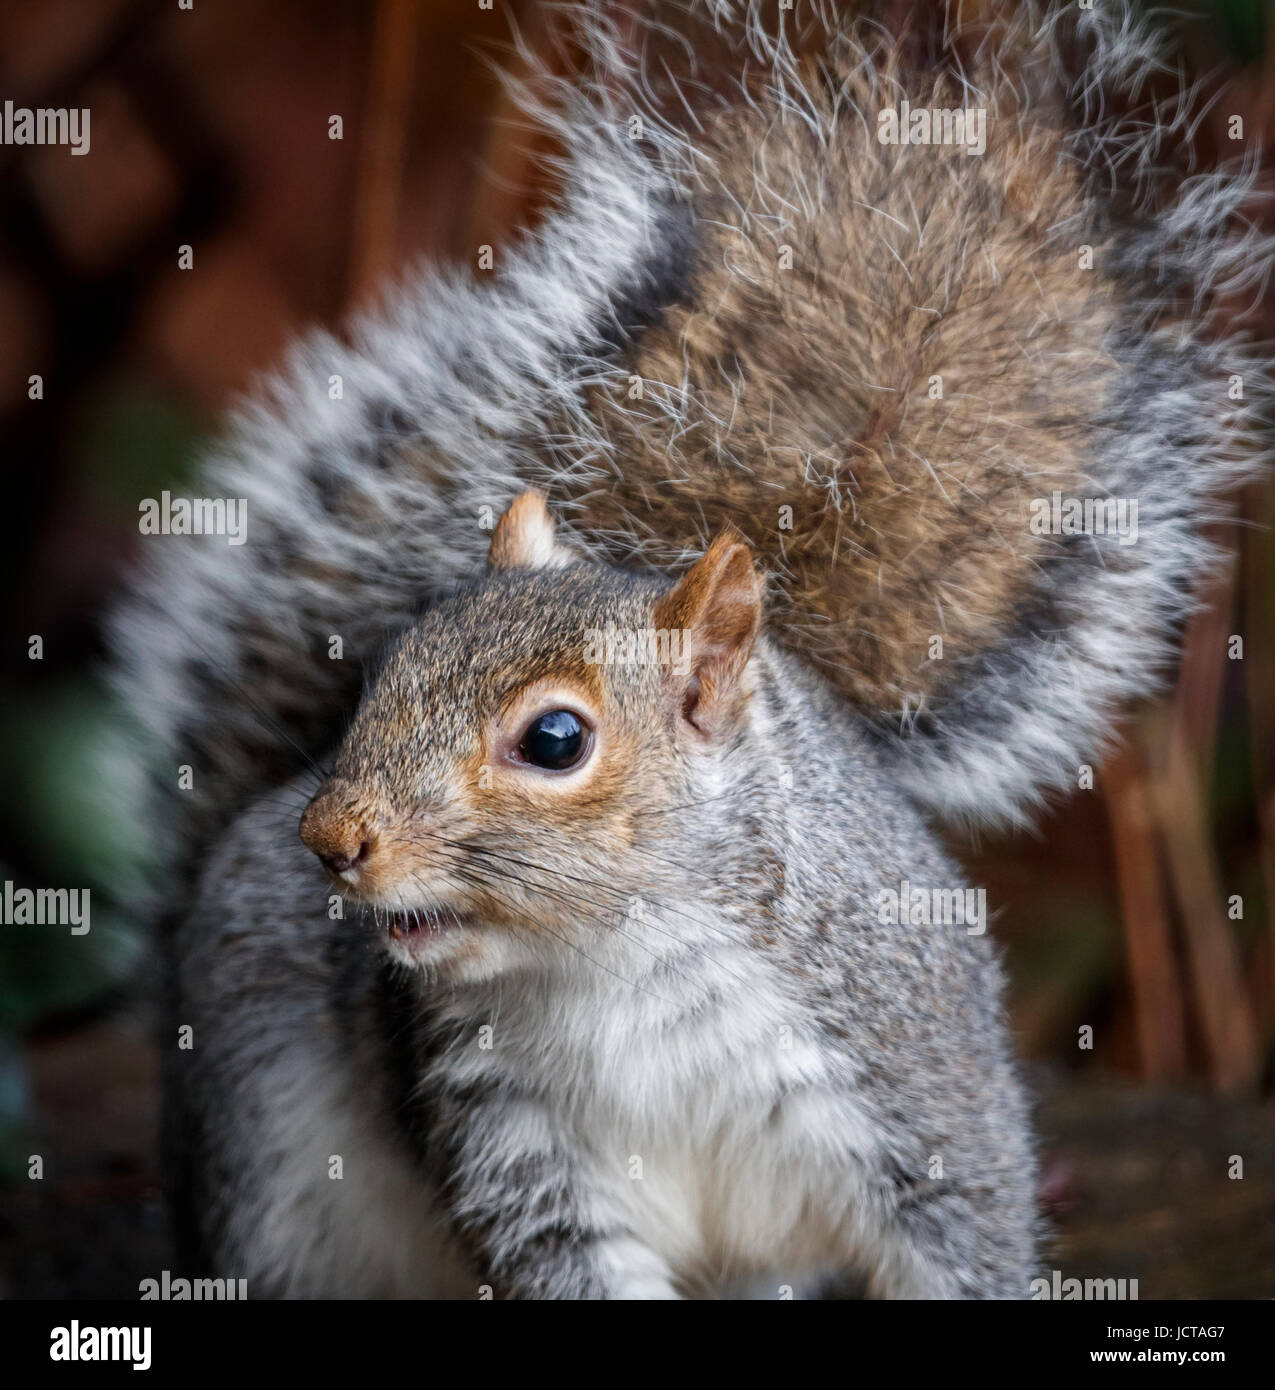 Close up of a grey squirrel, or American gray squirrel, Sciurus carolinensis, a cute rodent which has become a common garden pest Stock Photo